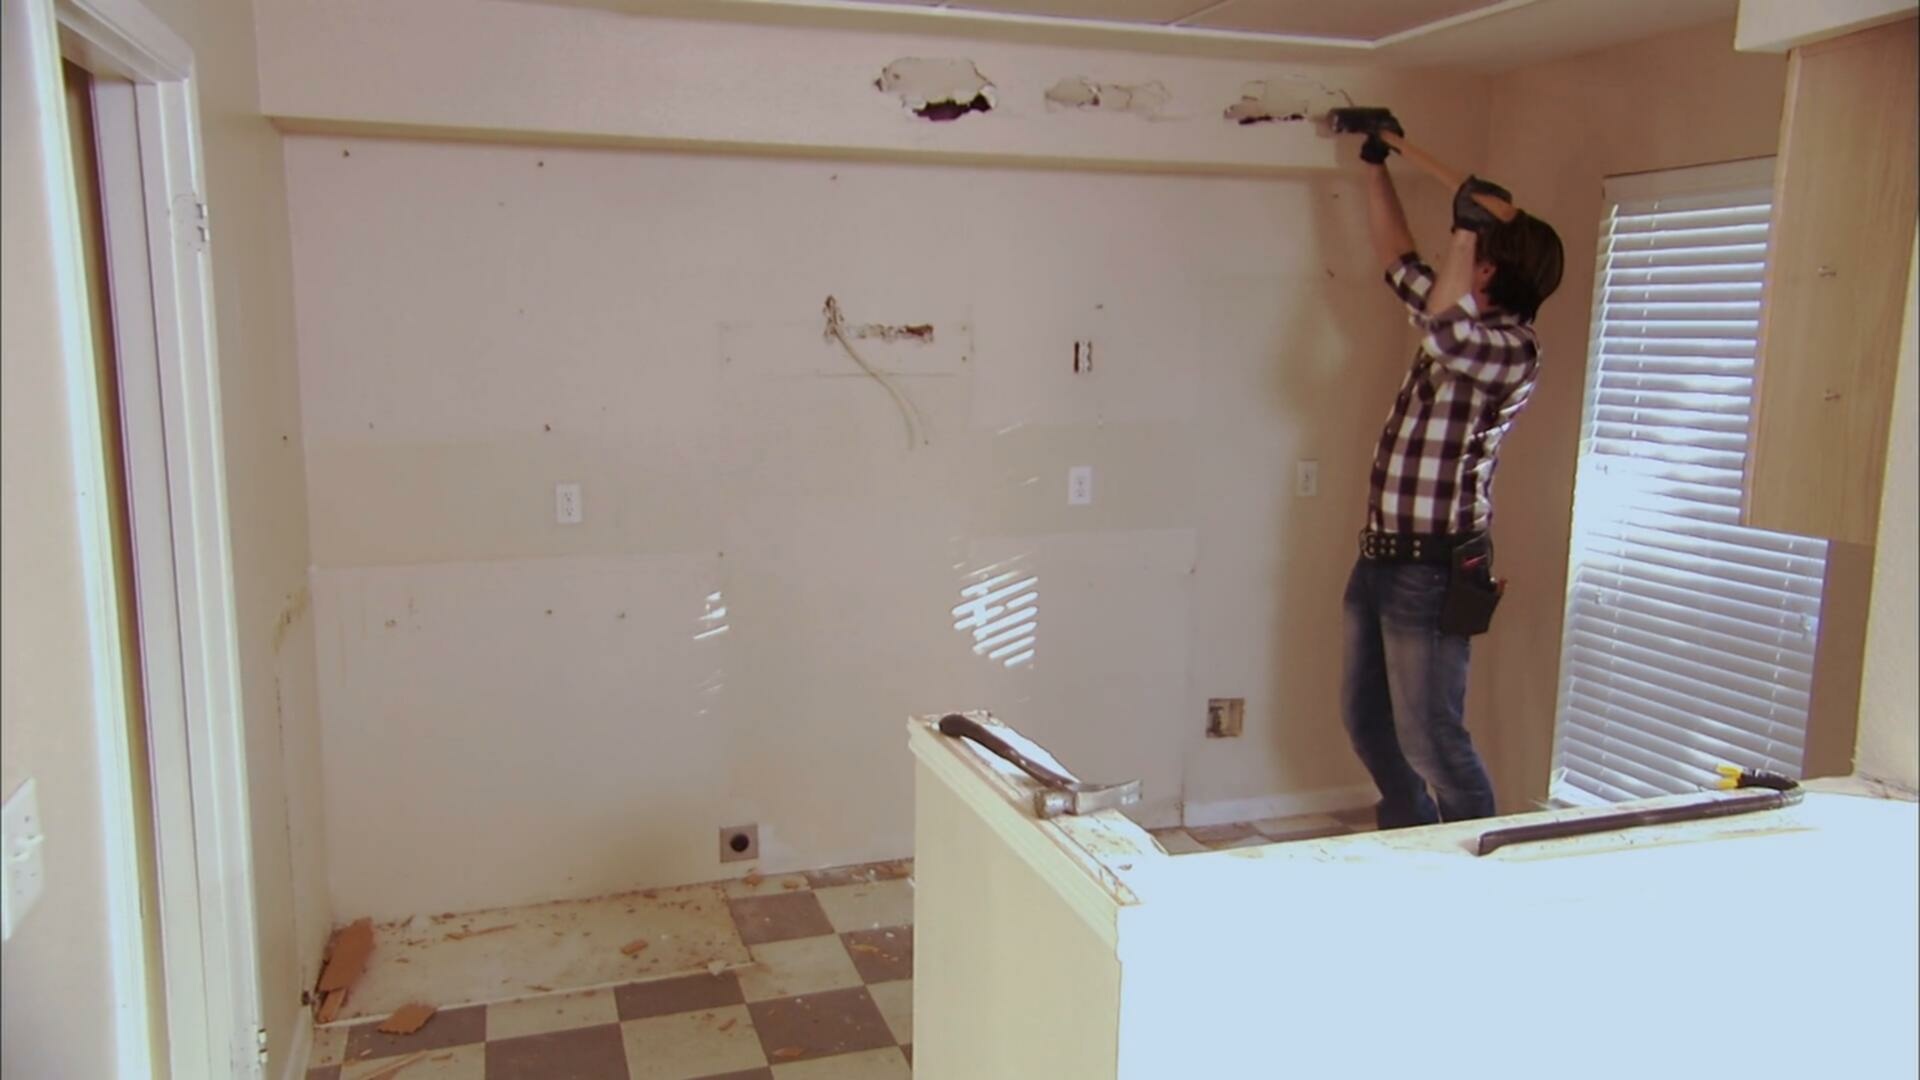 Property Brothers S03E01 Under Their Own Roof Wyatt and Whitney 1080p MAX WEB DL DDP2 0 H 264 NTb TG